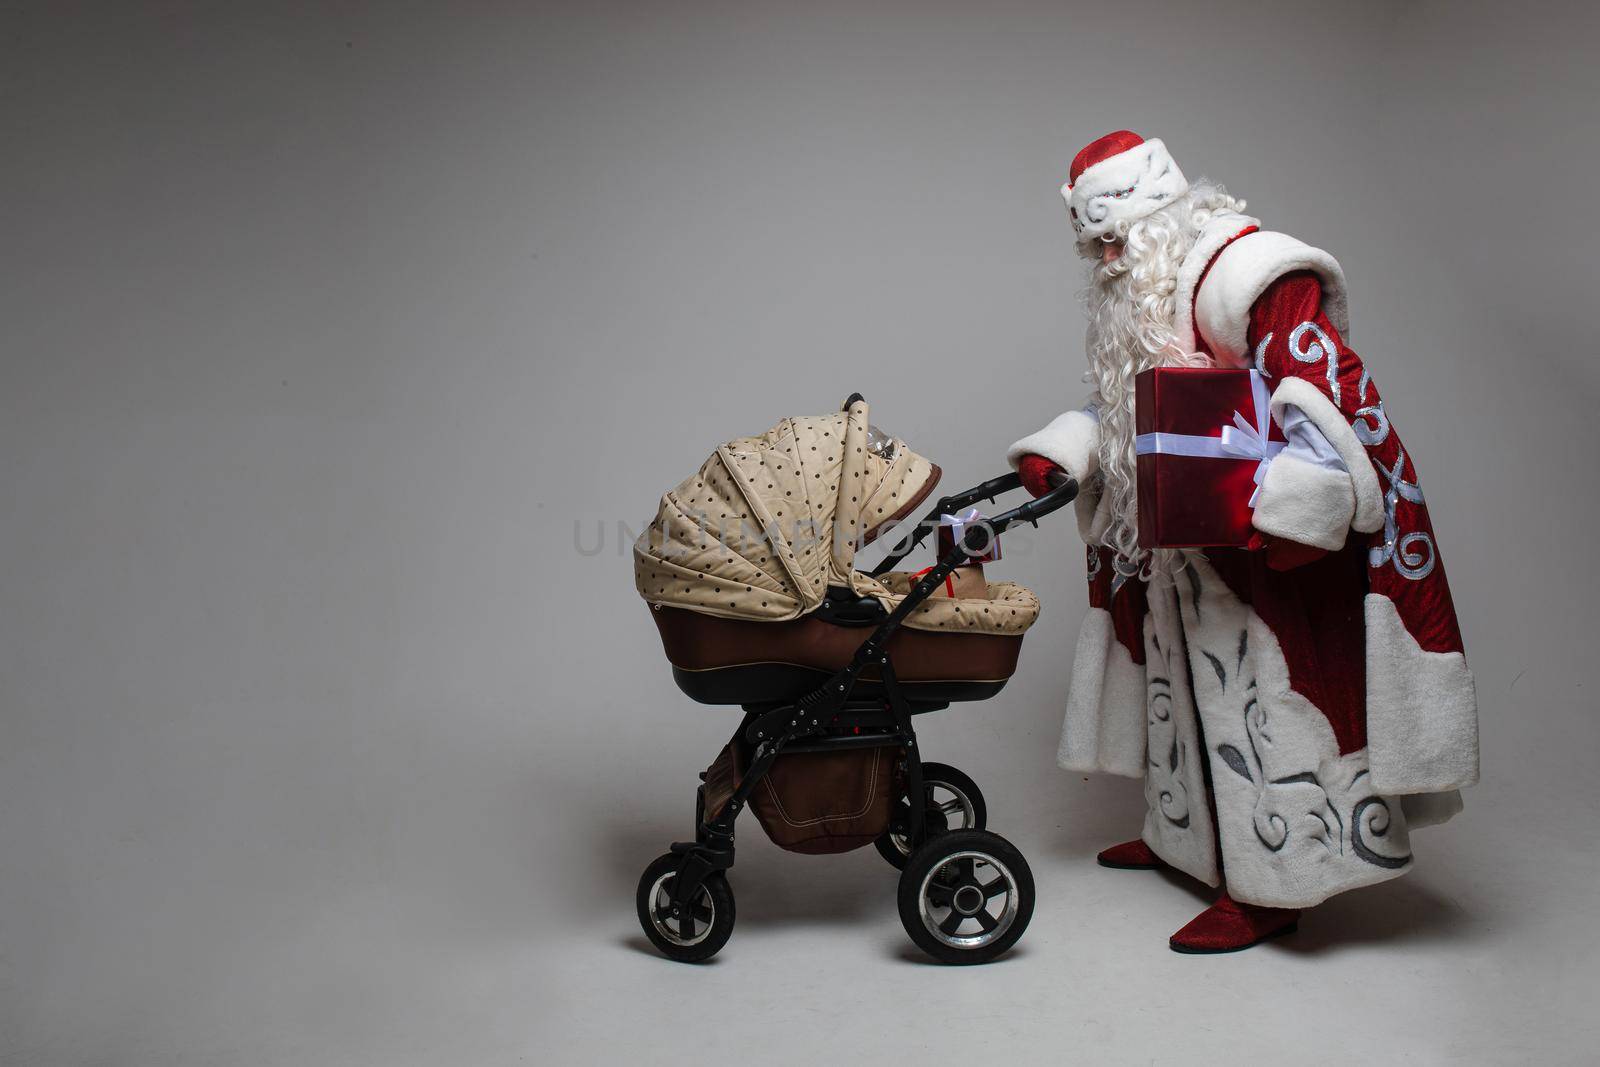 father frost walks with a little baby in the stoller, picture isolated on grey background